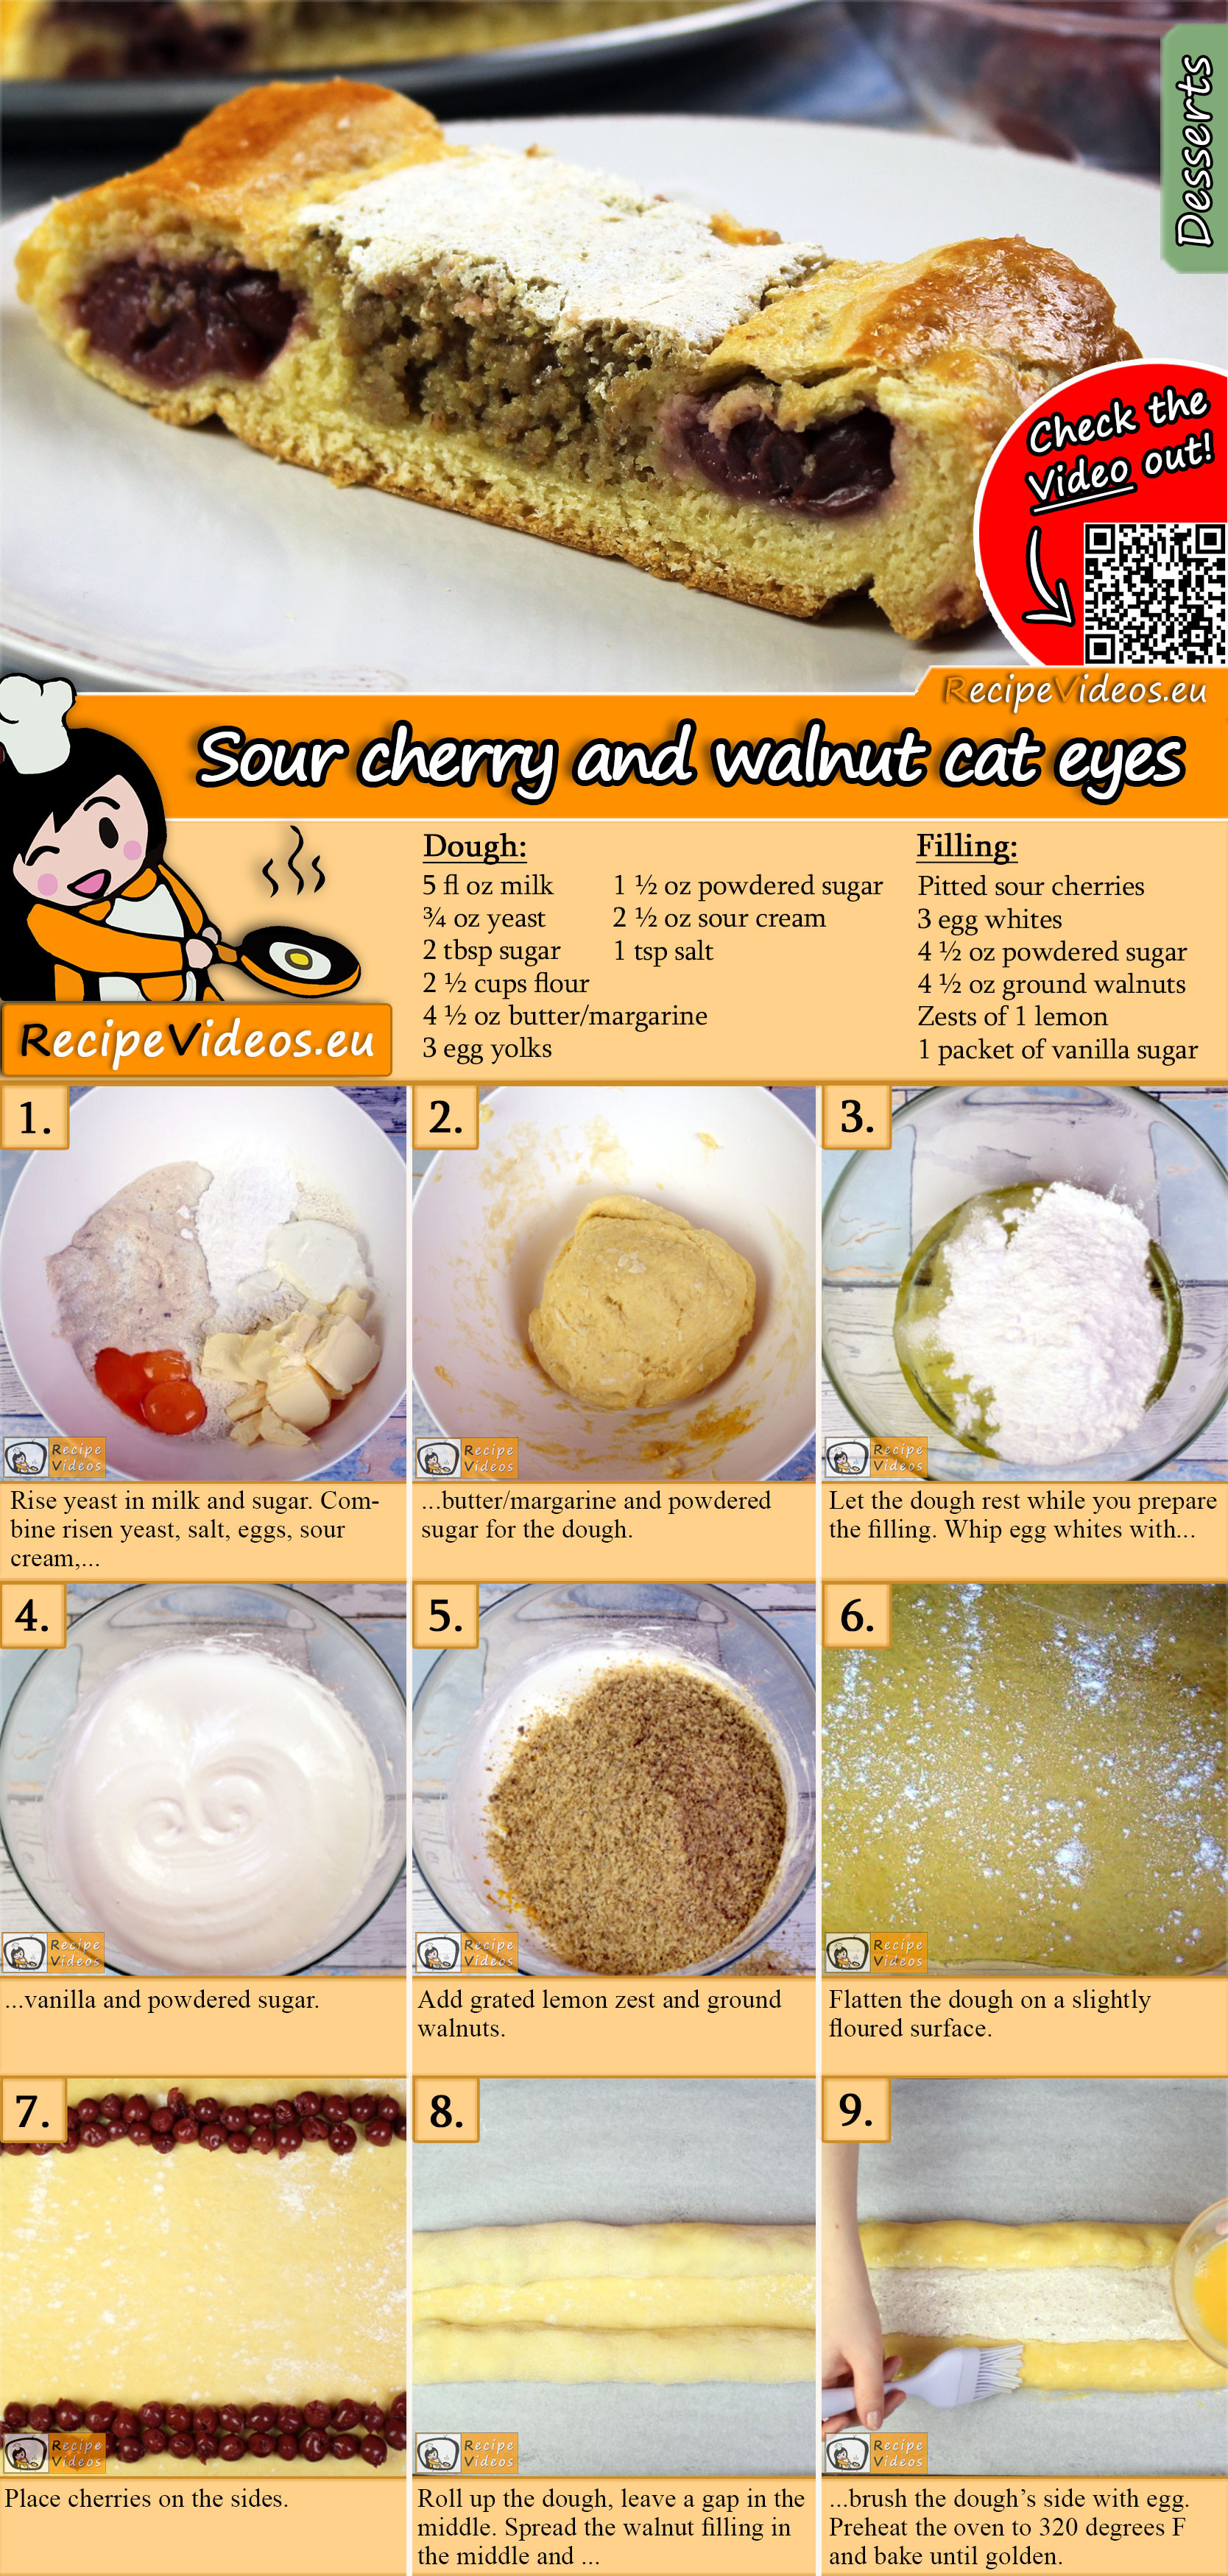 Sour cherry and walnut cat eyes recipe with video